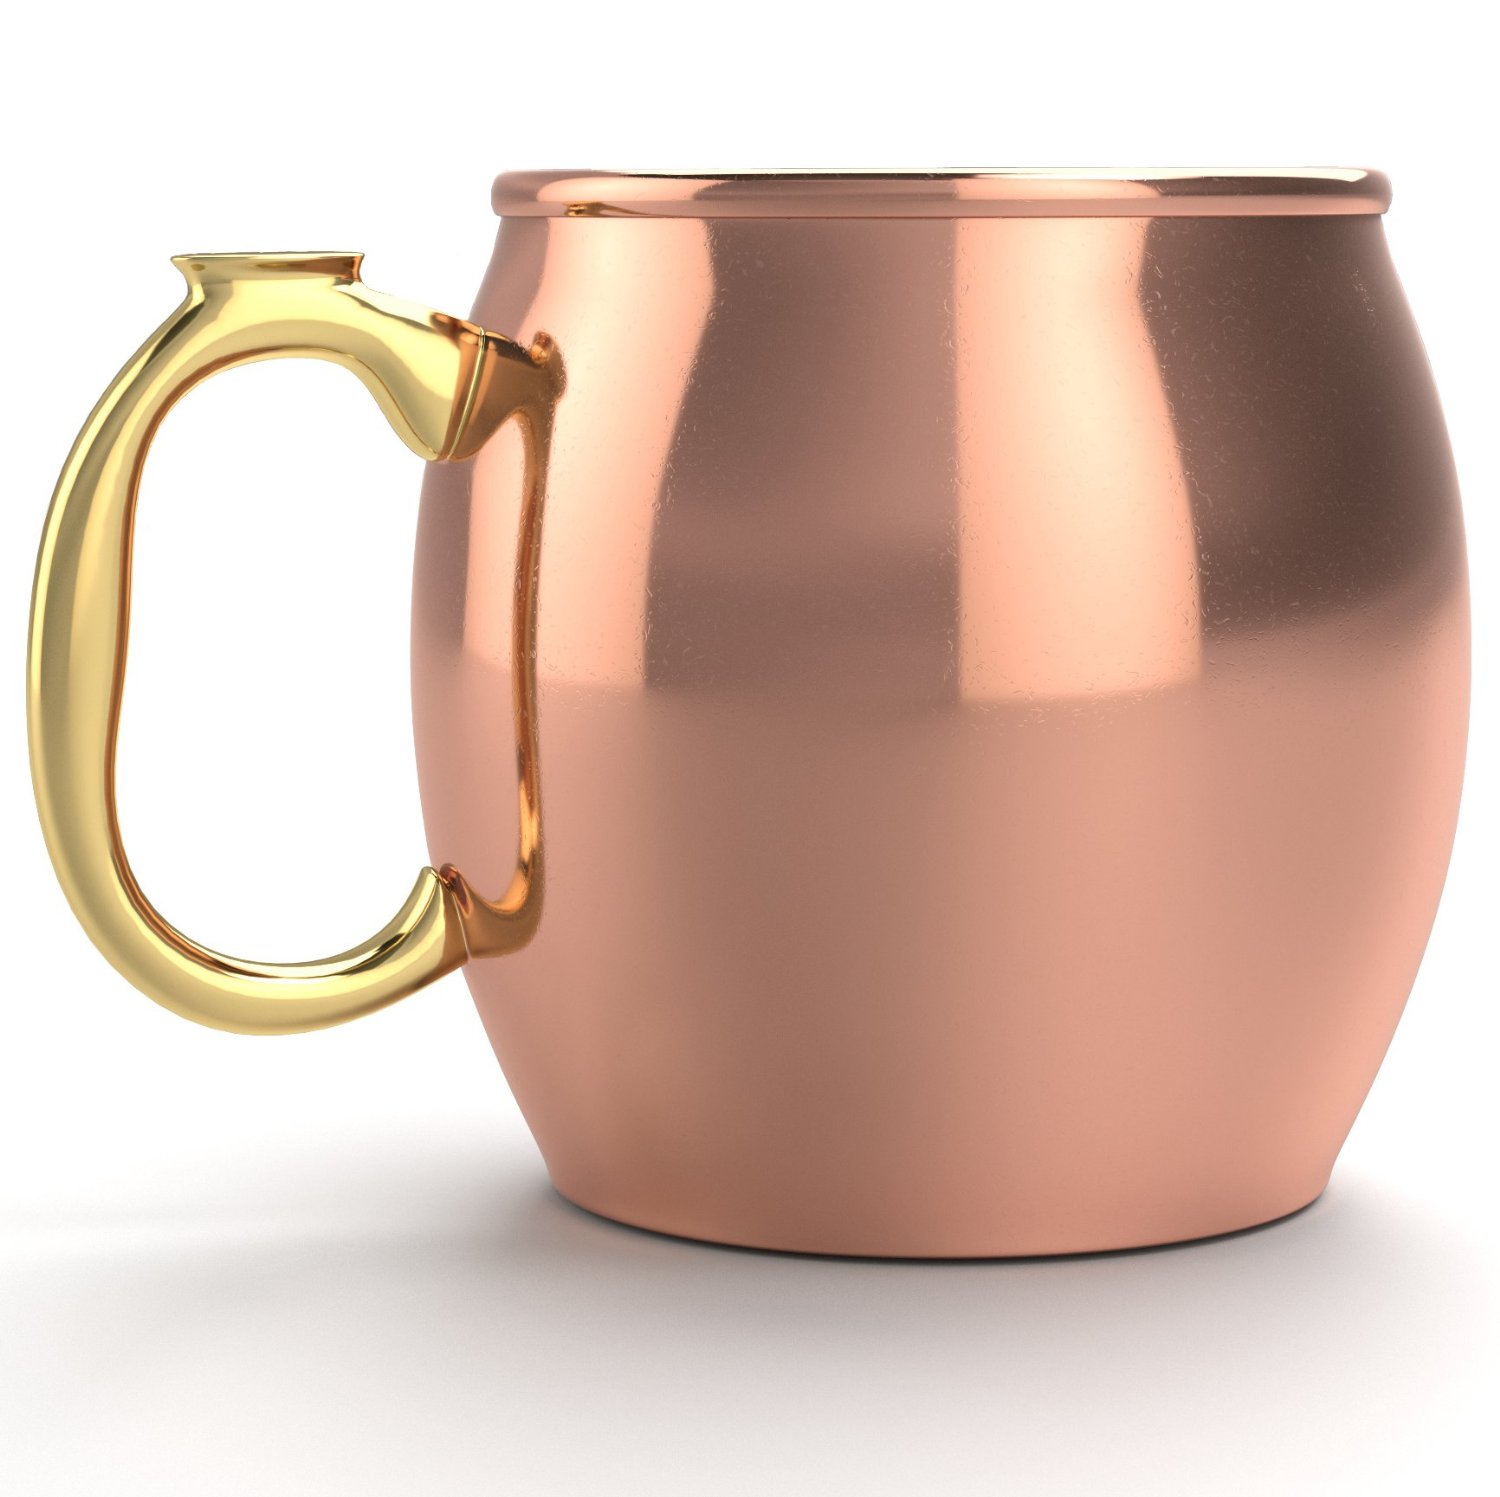 Stainless Steel Moscow Mule Mug Copper Plated Color